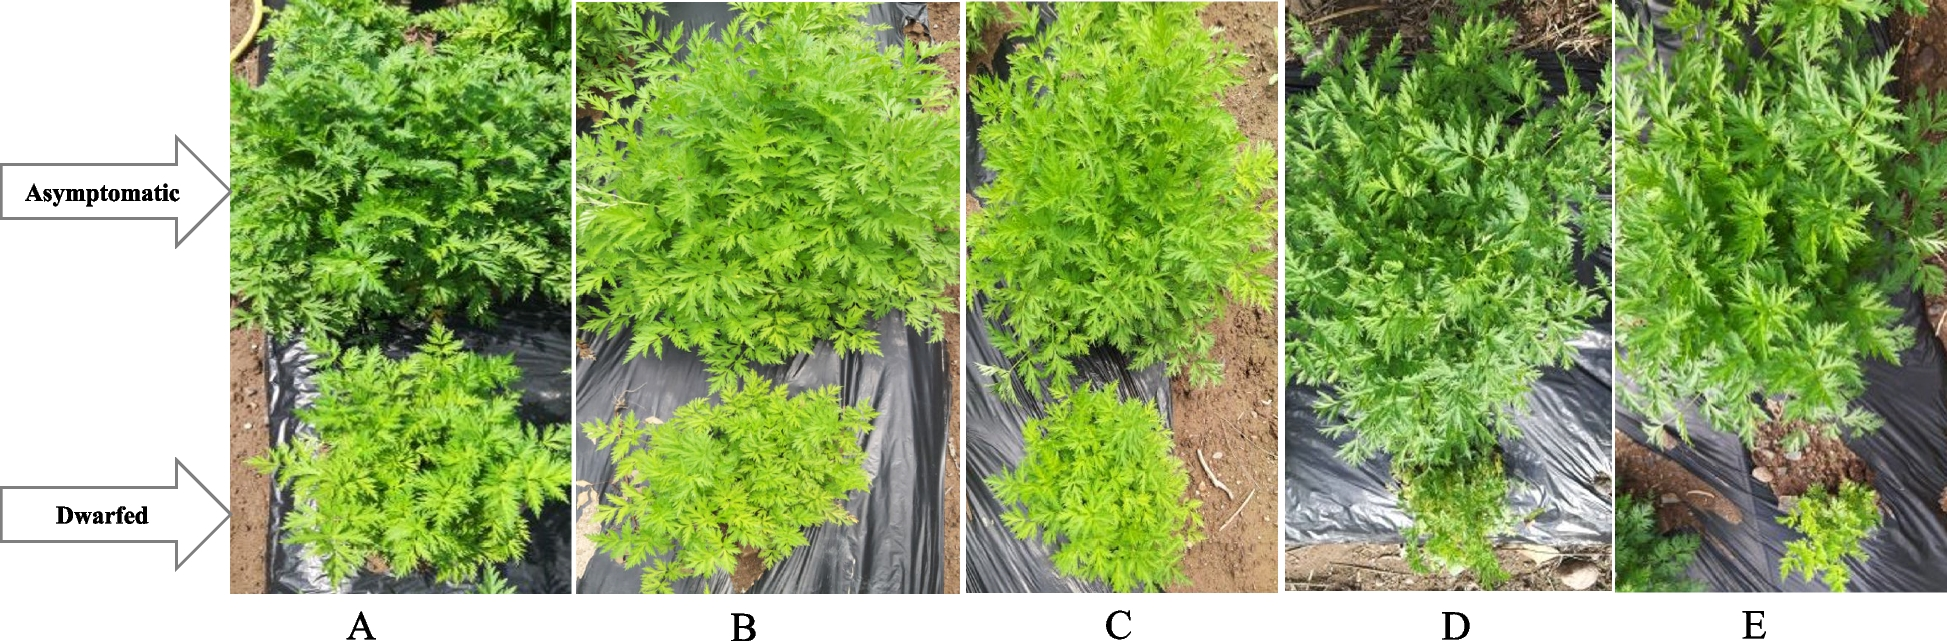 Deciphering the virome of Chunkung (Cnidium officinale) showing dwarfism-like symptoms via a high-throughput sequencing analysis